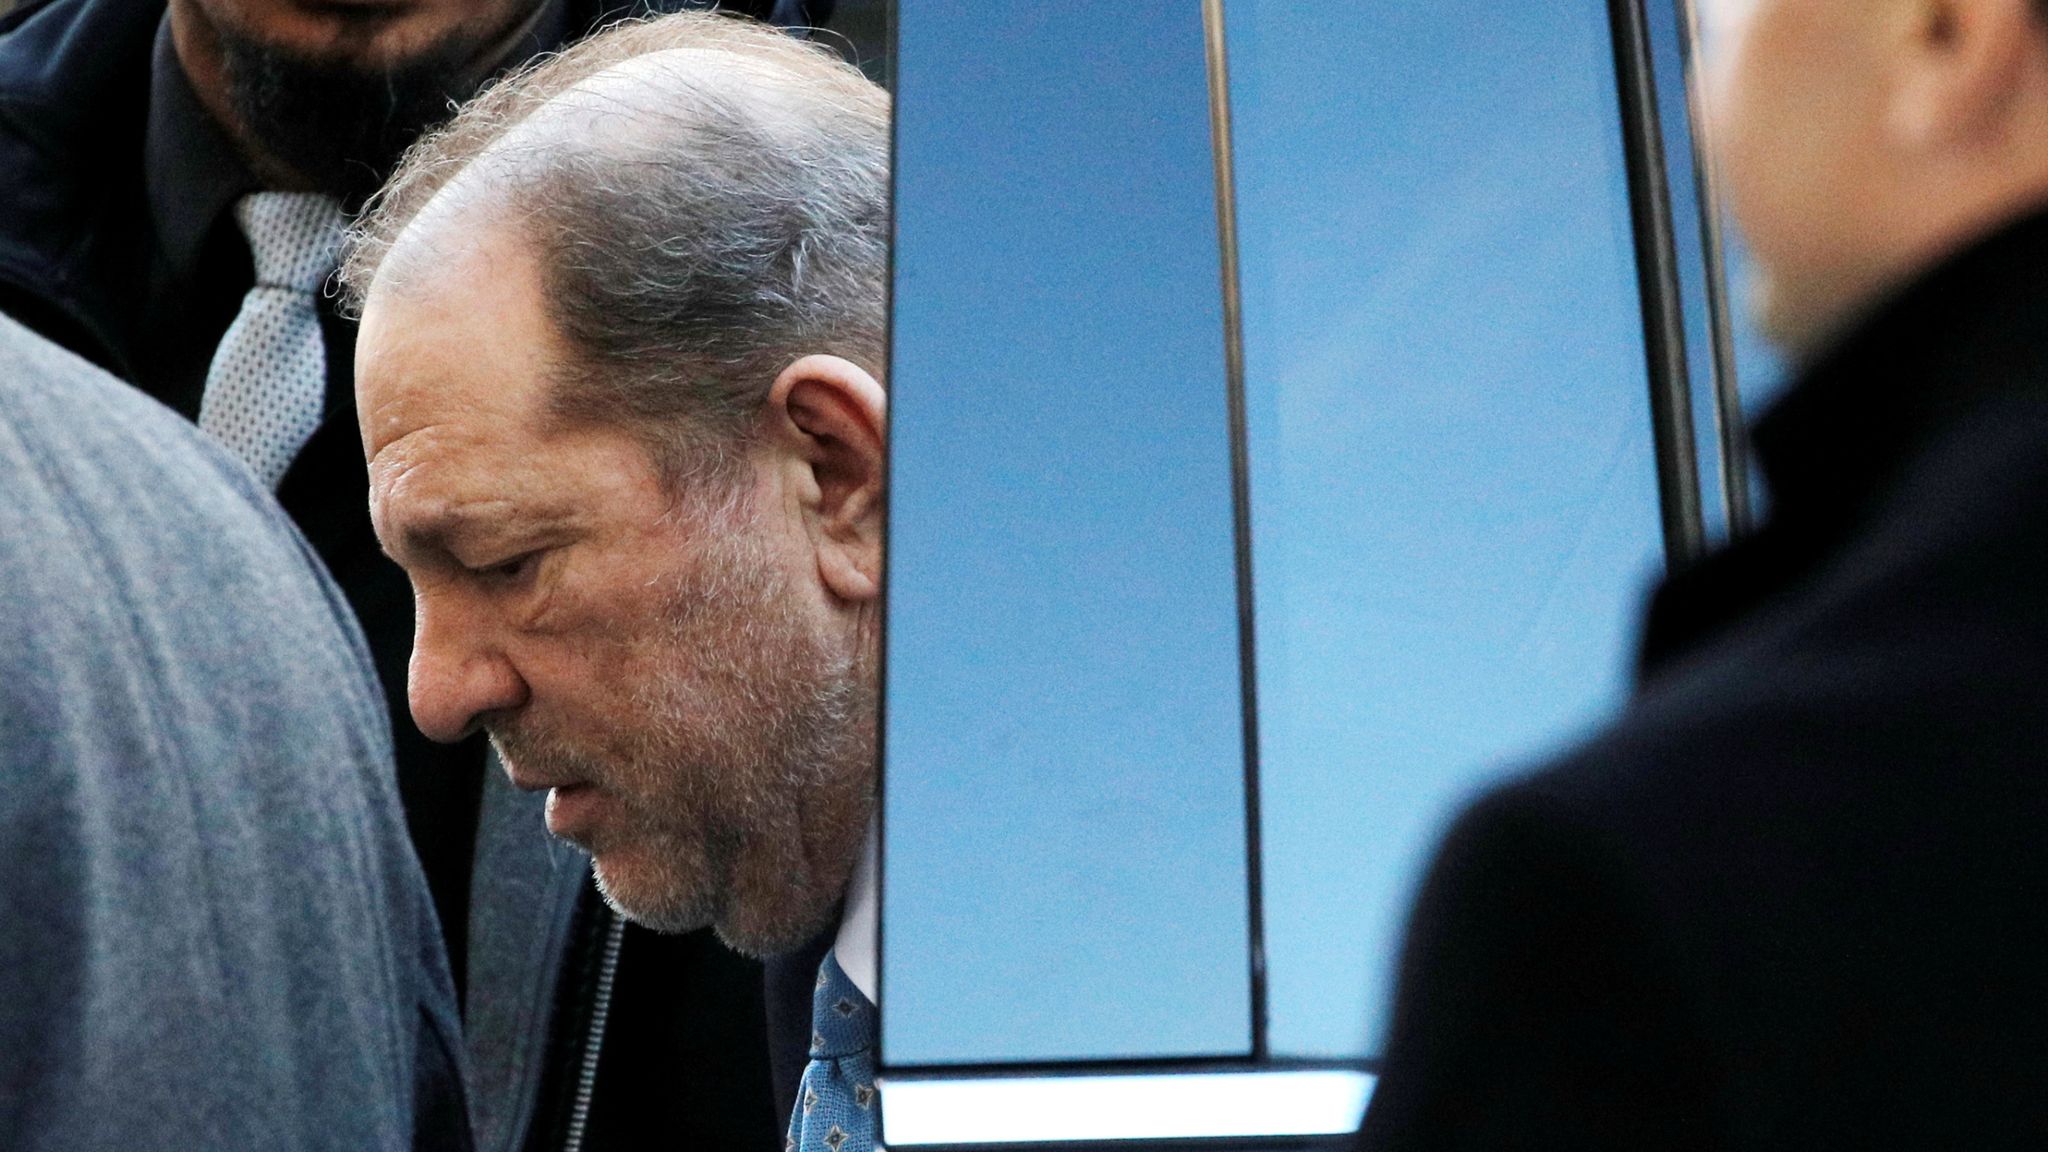 Harvey Weinstein Former Hollywood Producer Extradited To California To Face More Sexual Assault